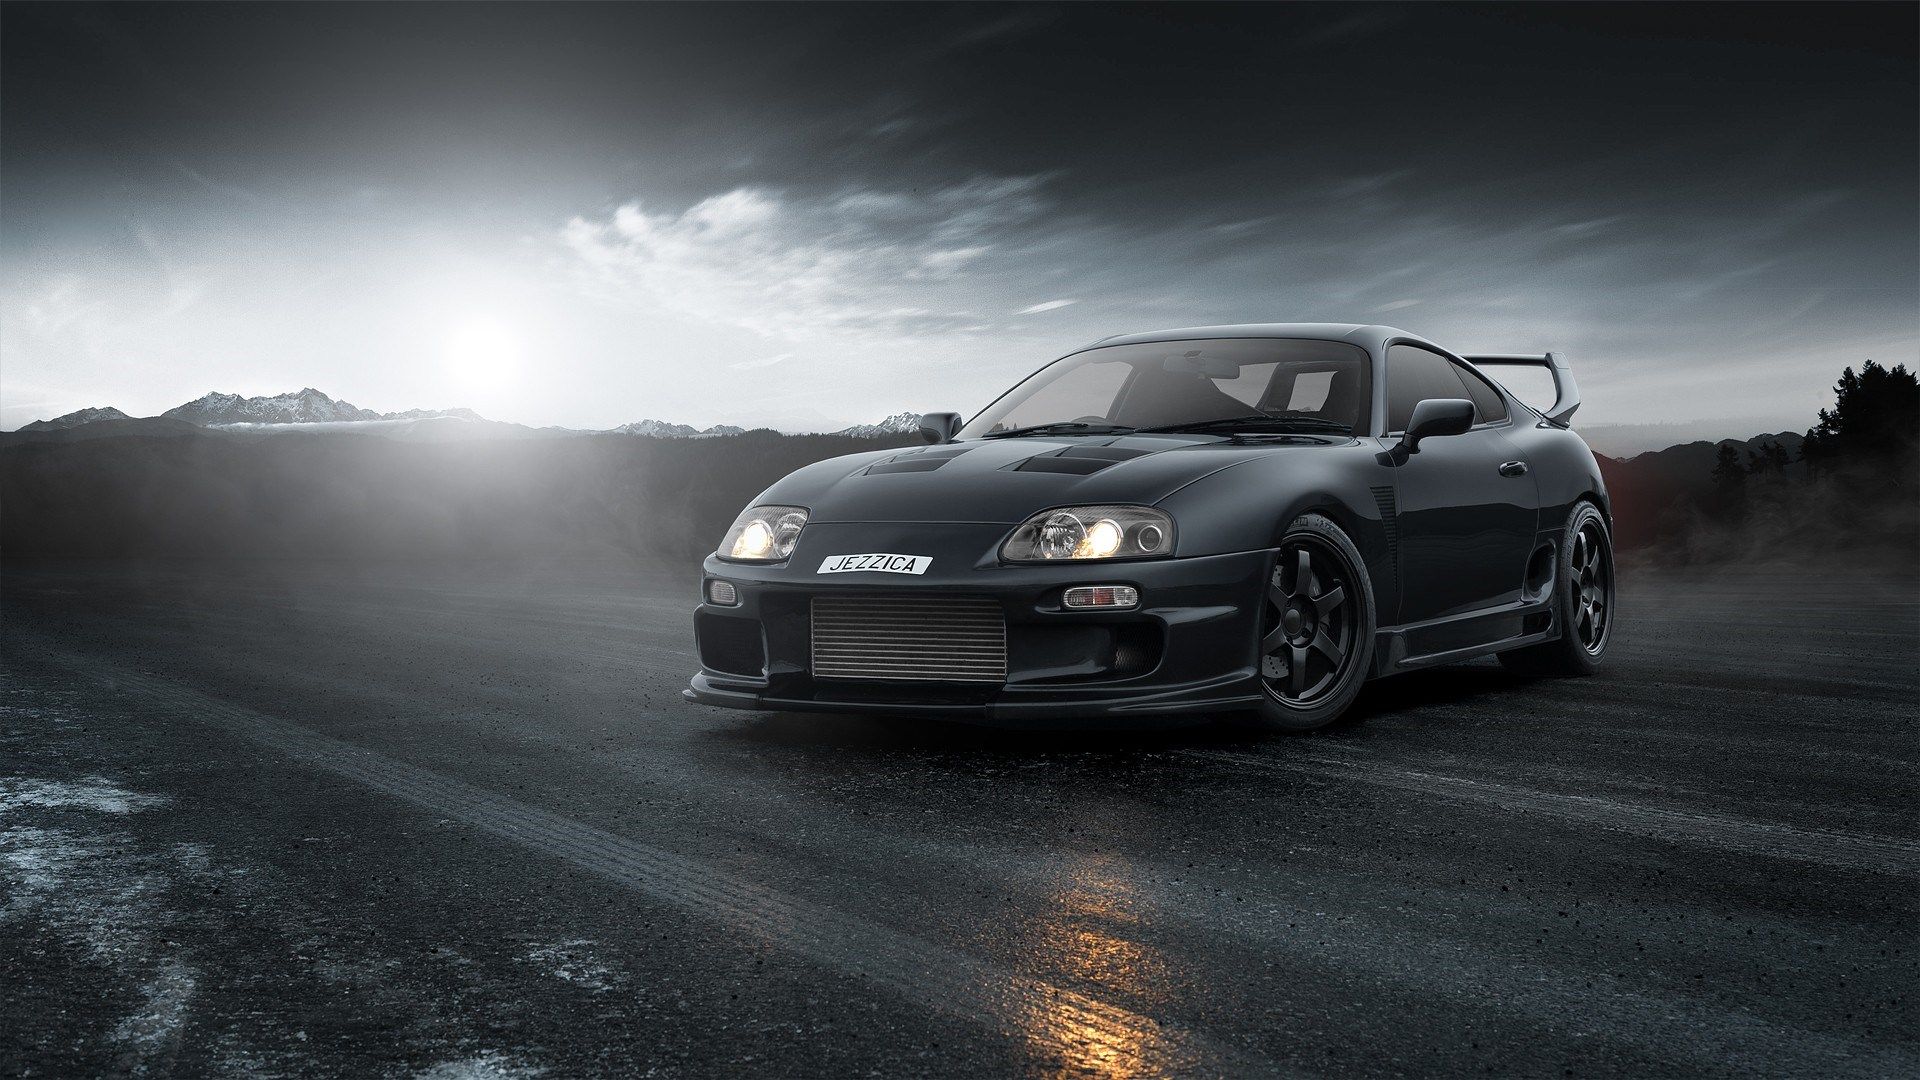 27 Toyota Supra HD Wallpapers | Backgrounds - Wallpaper Abyss